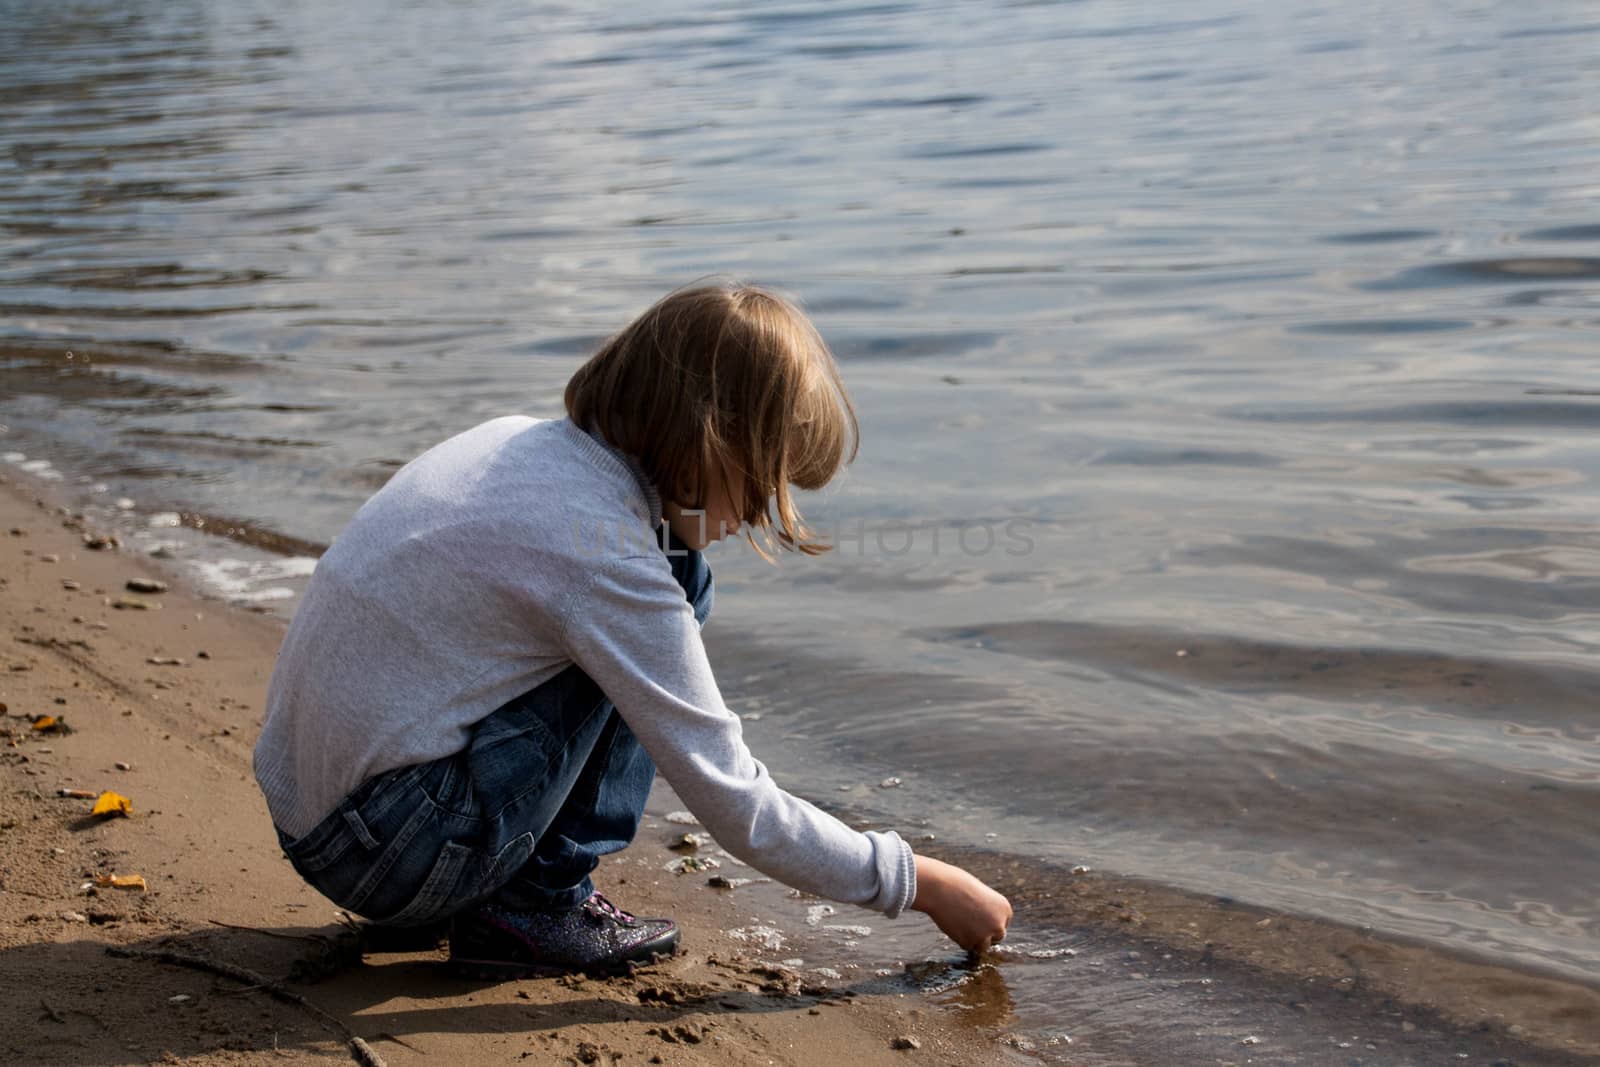 girl draws in the sand on the river Bank